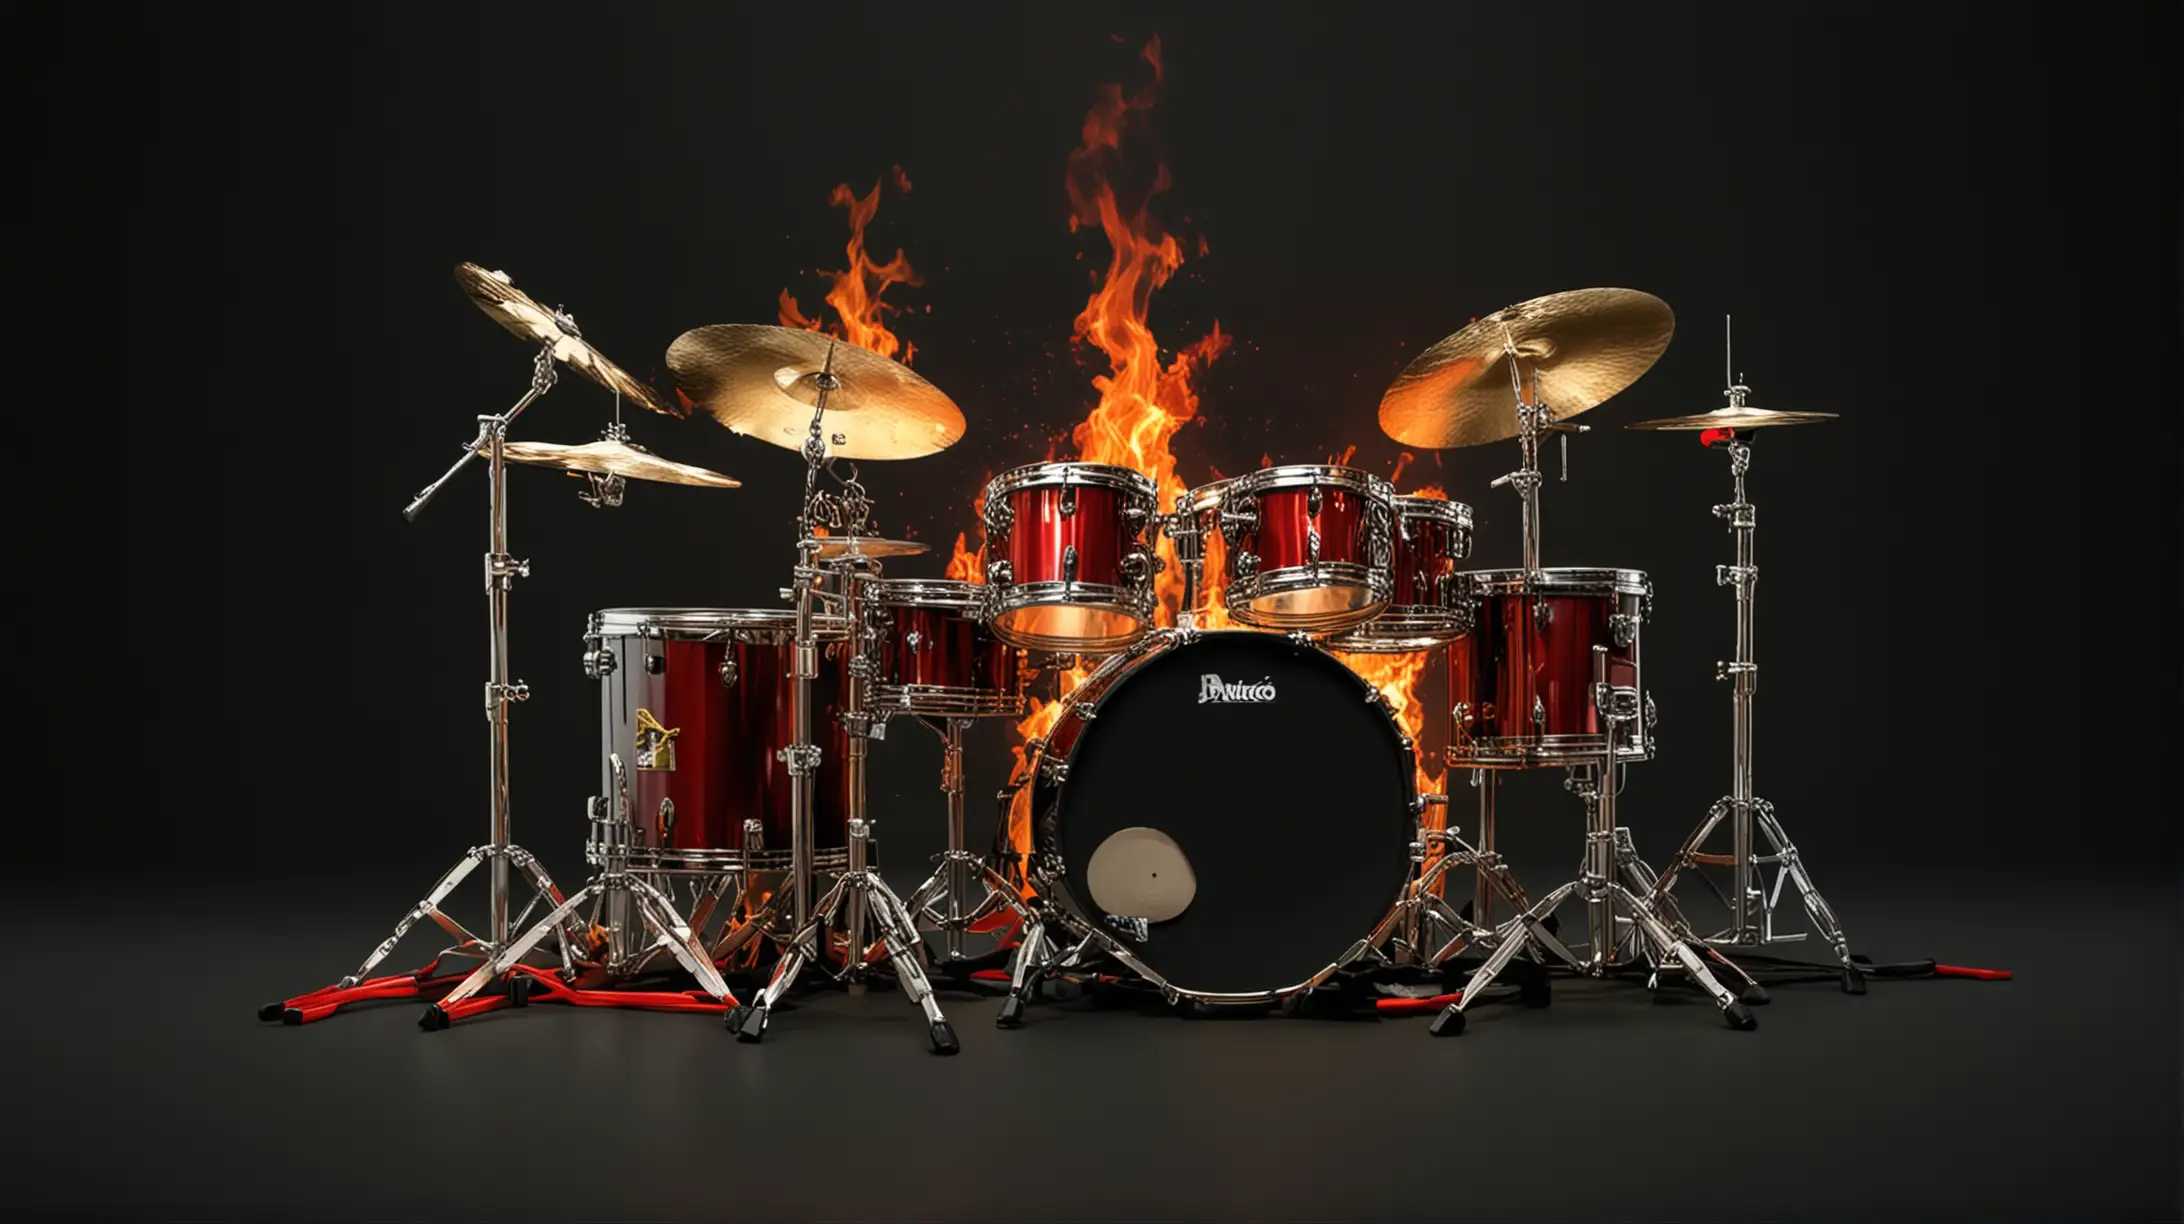 DRUM KITS WITH BBLACK BACKGROUND AND COLORS RED GOLD AND GREEN WITH FIRE